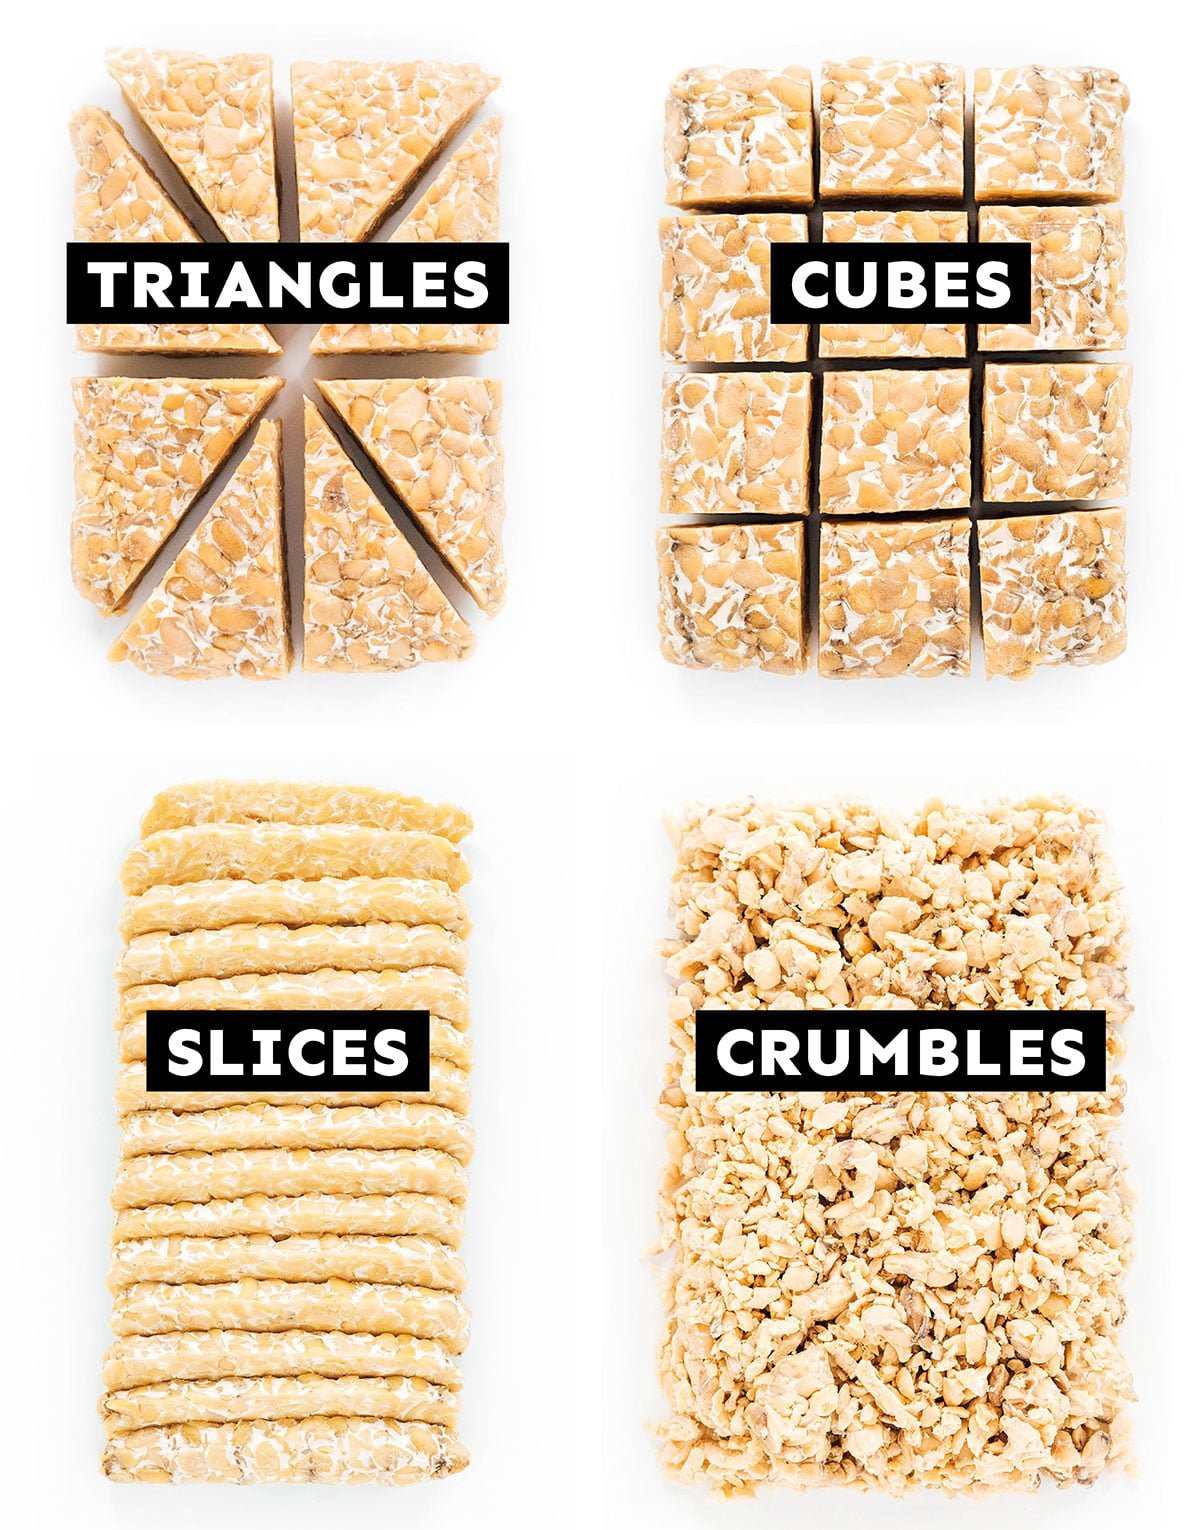 Visual guide to cutting tempeh into triangles, cubes, slices, and crumbles.